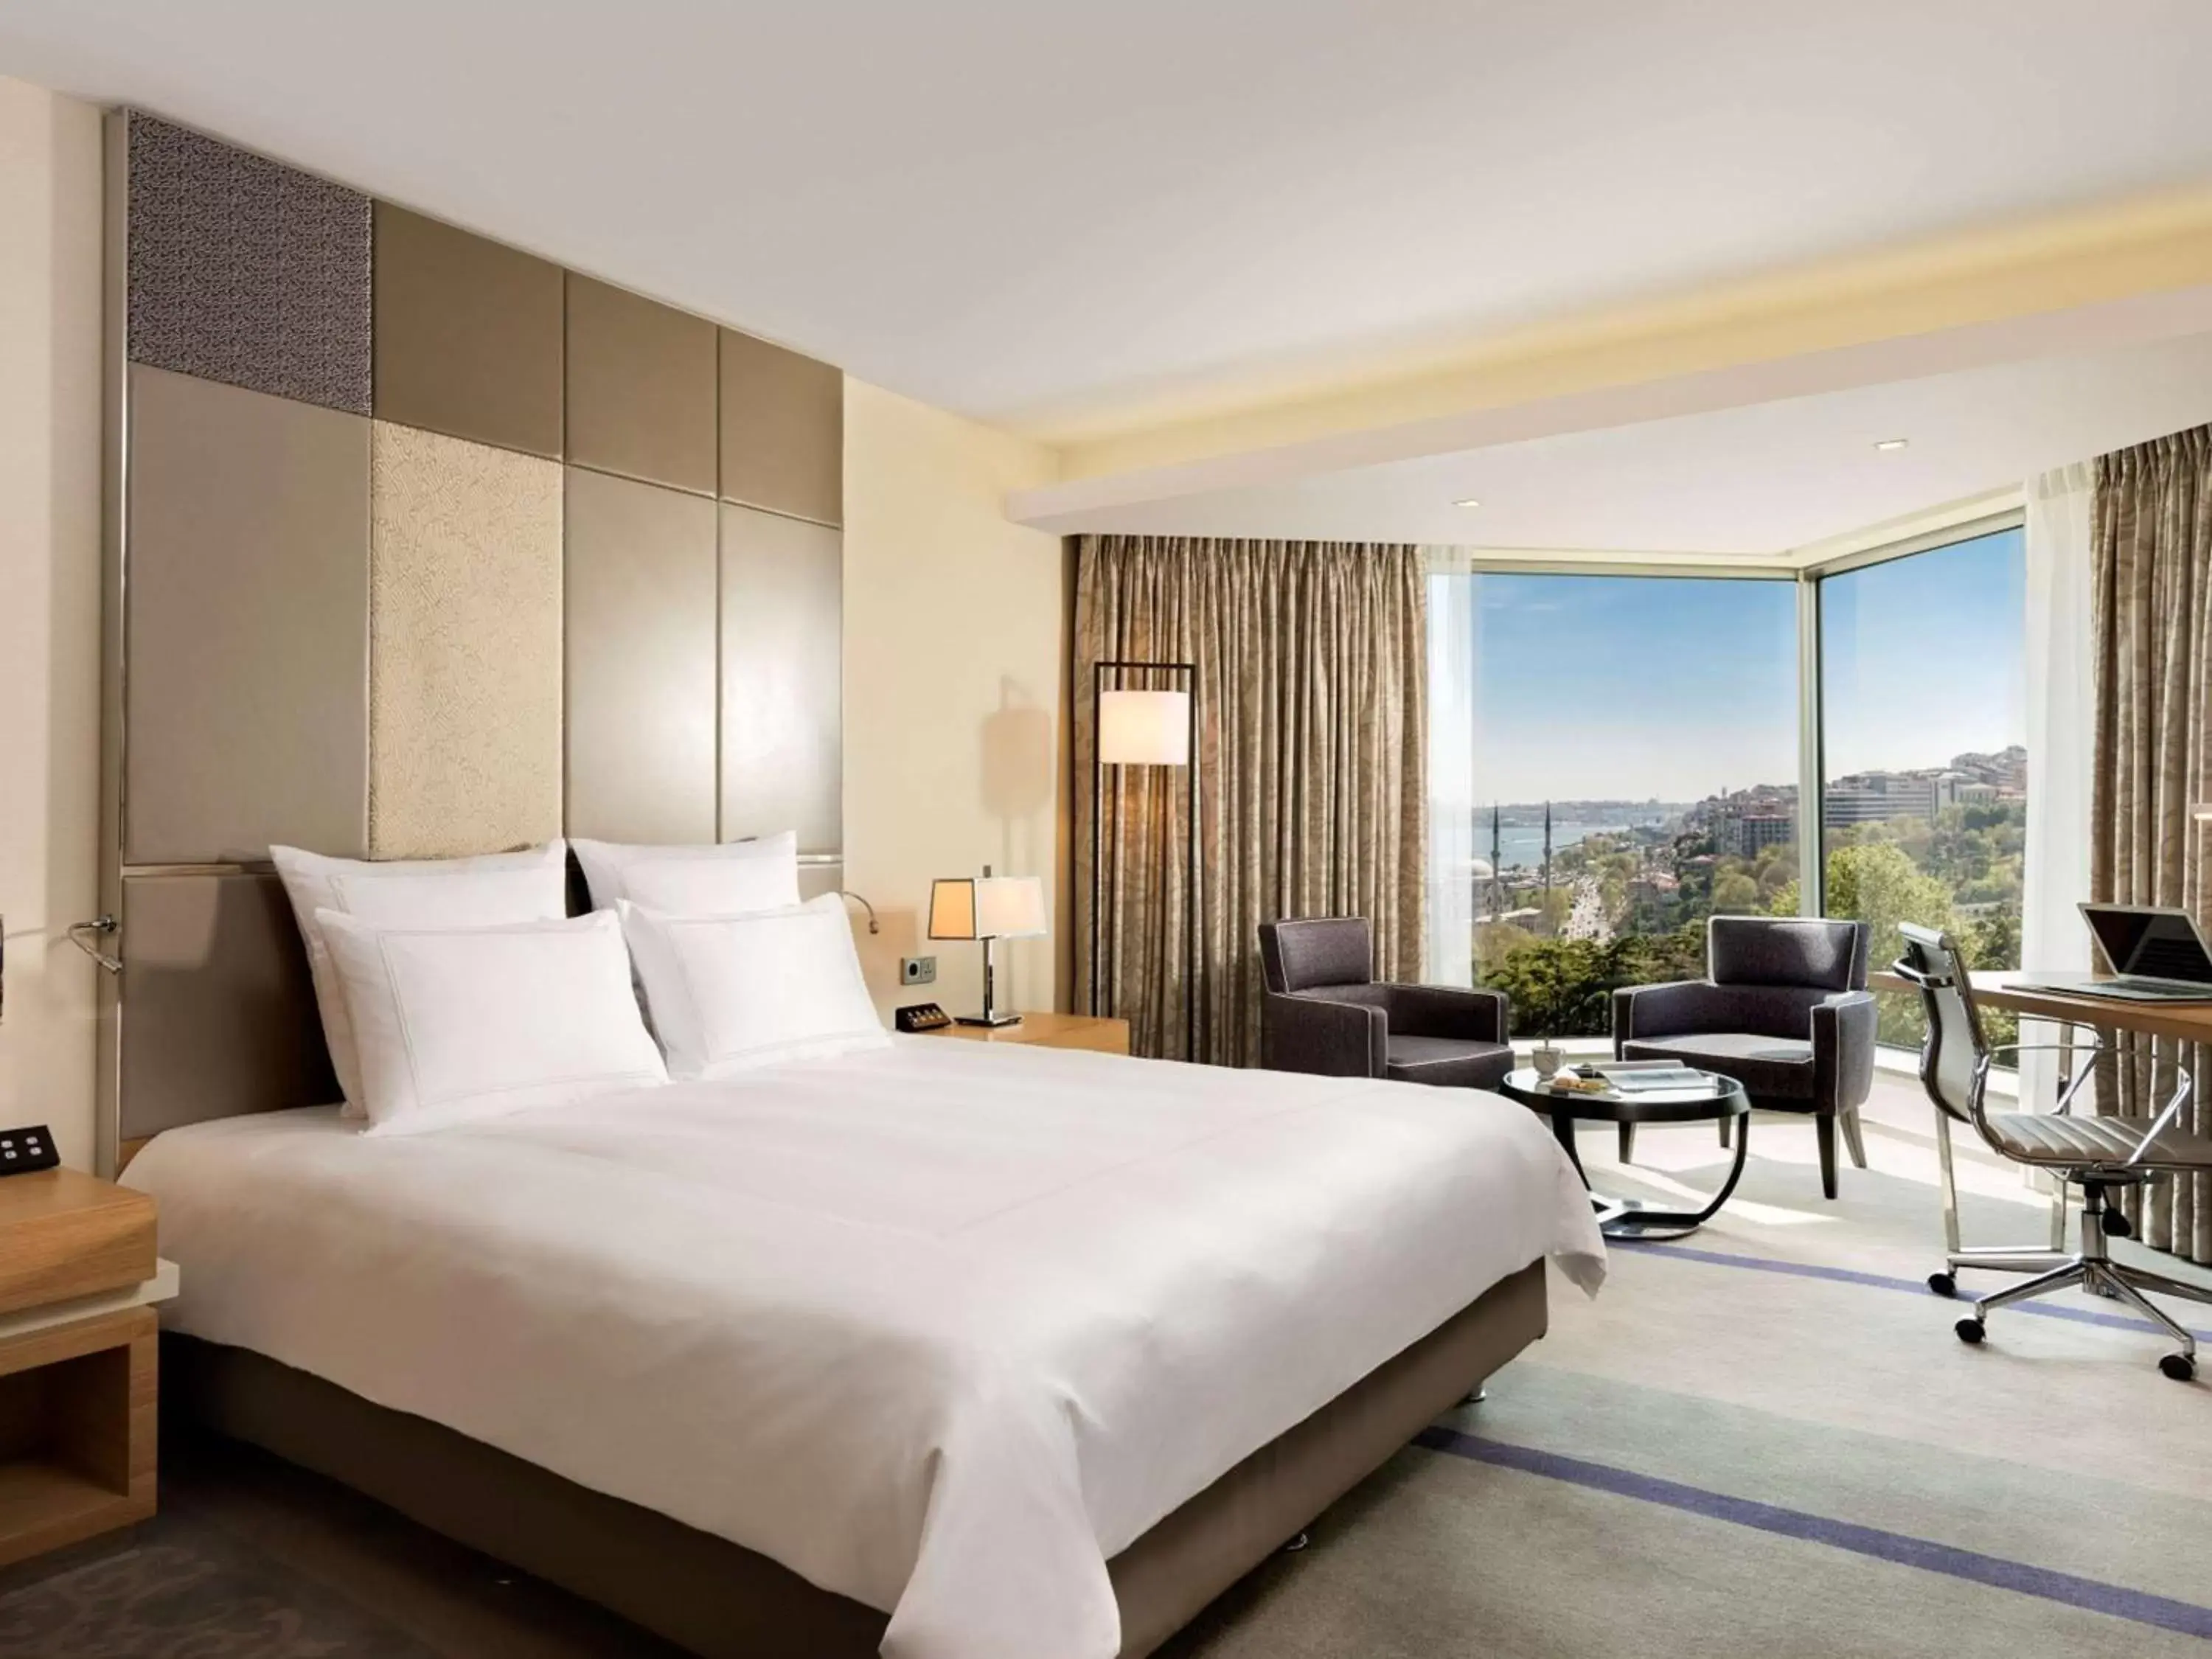 Swiss Executive King Room with Bosphorus View and Lounge Access in Swissotel The Bosphorus Istanbul